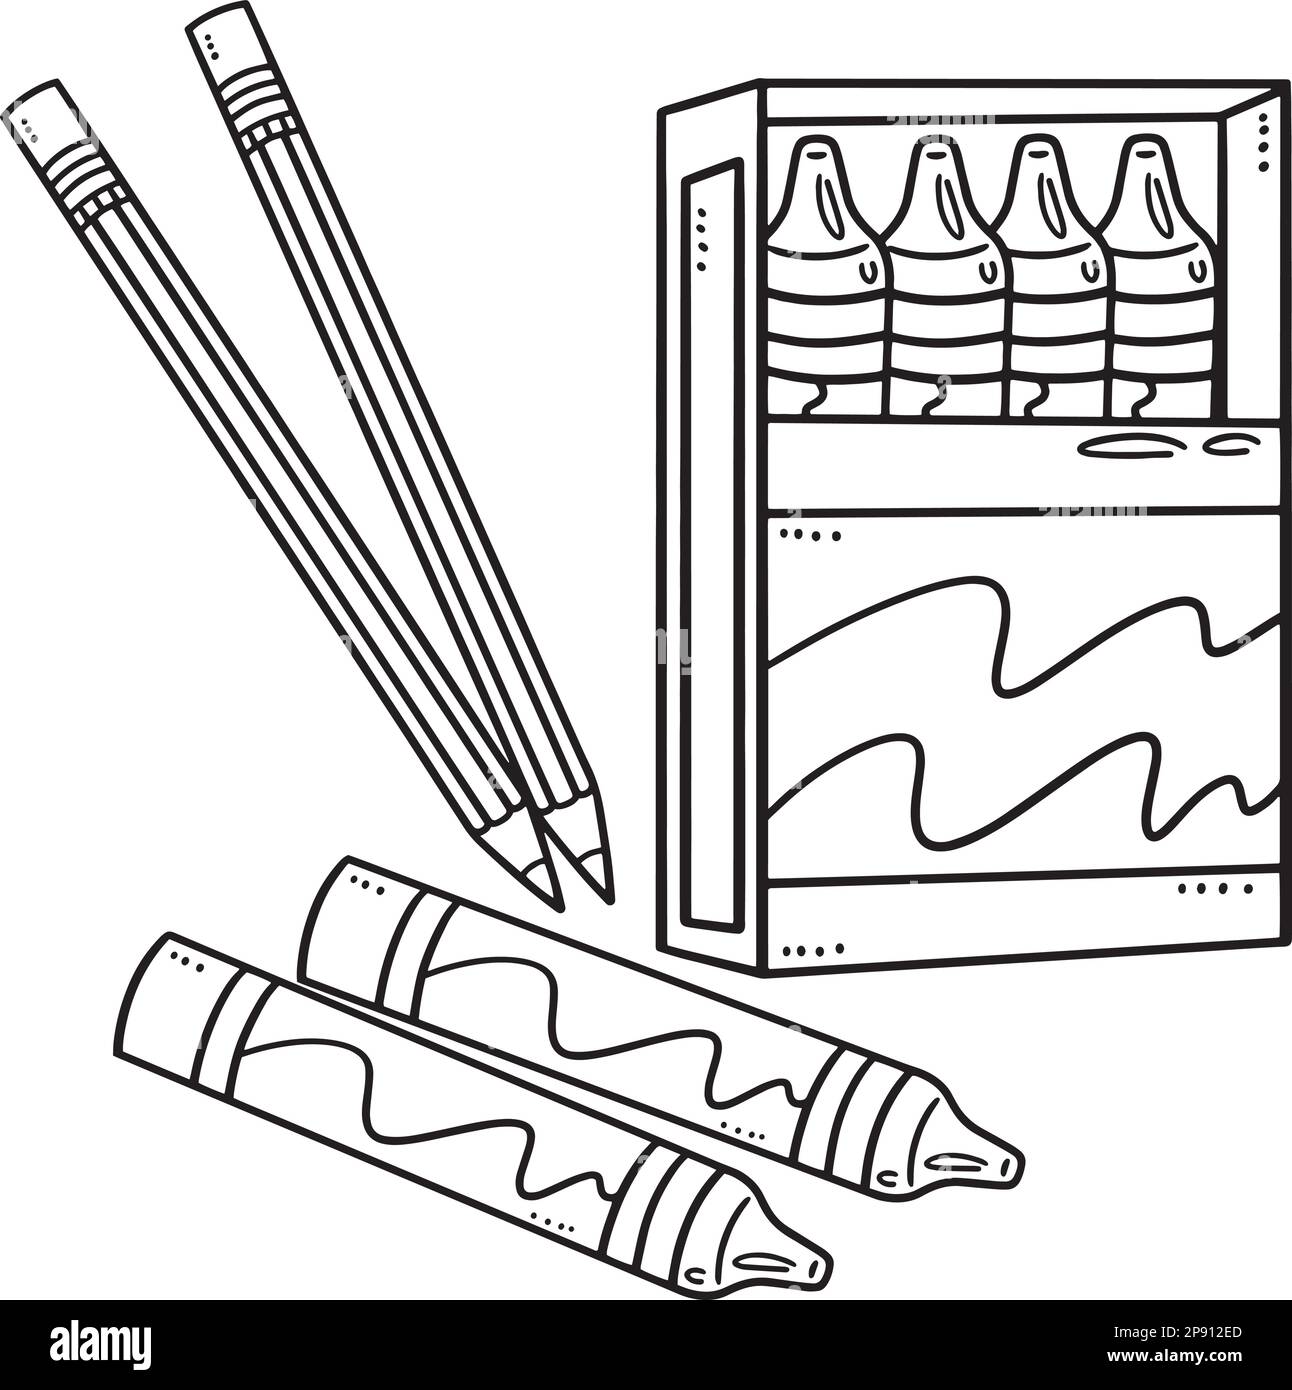 Crayon coloring pages & clipart, at